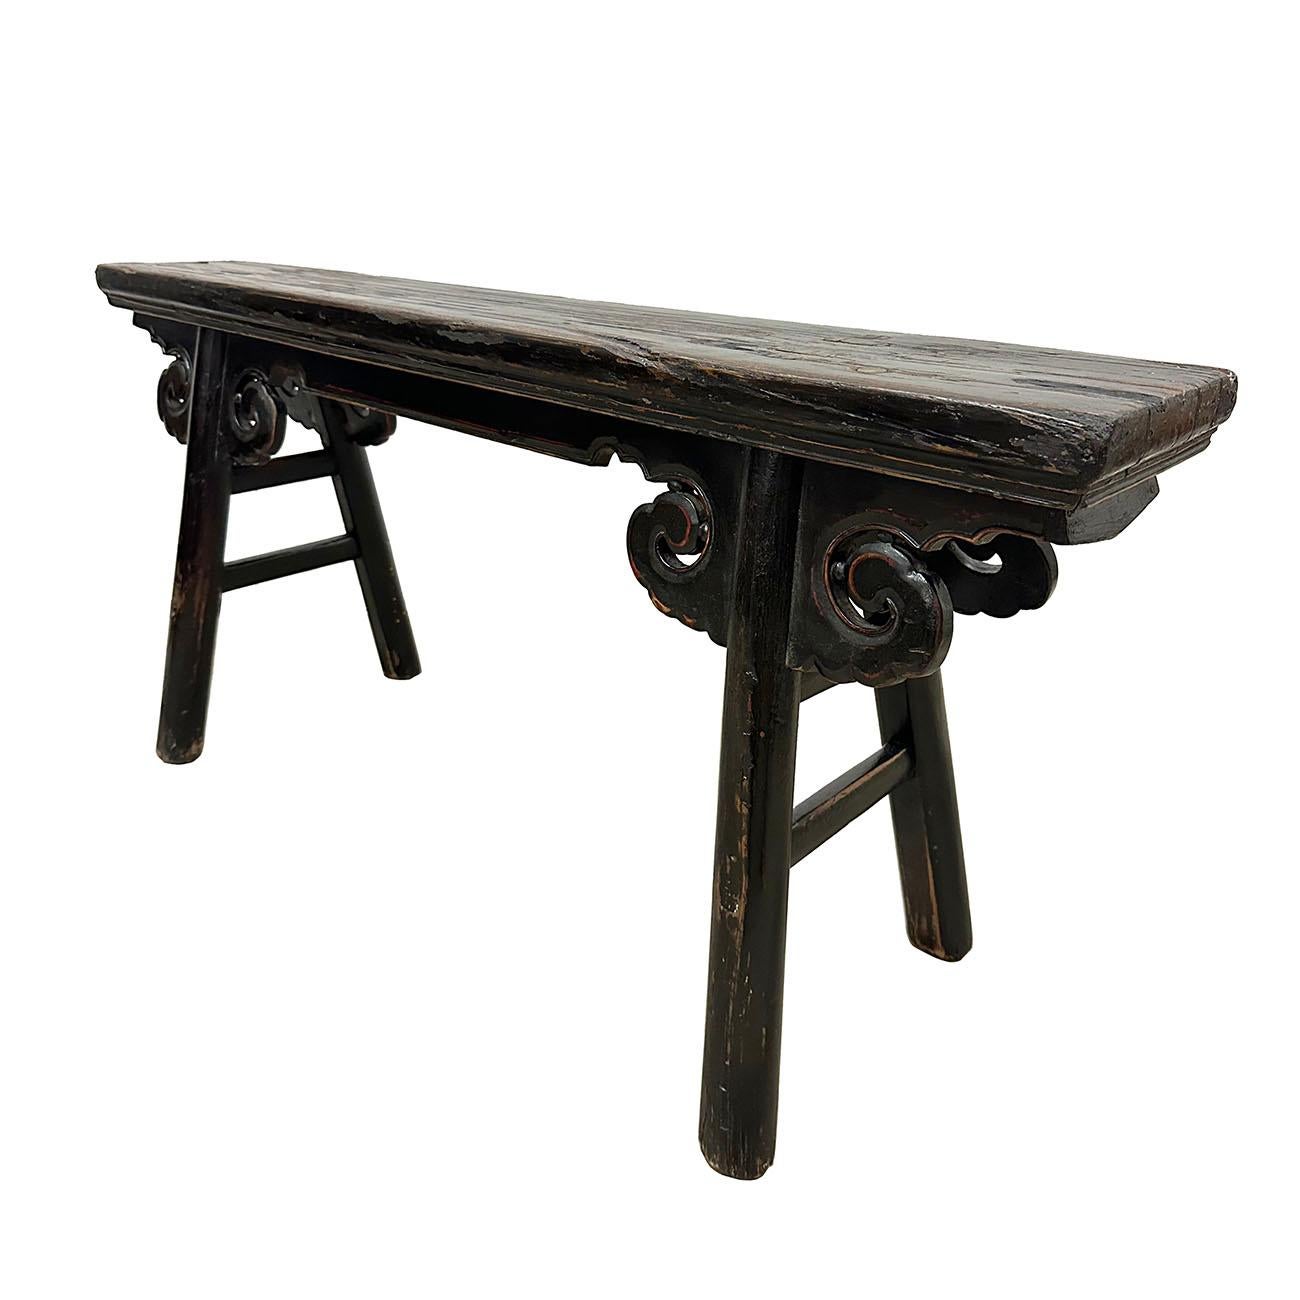 This Chinese antique country bench that you can use it as a coffee table. This bench was a classic design and elegant with some simple carving and solid construction. Black lacquer finished. Smooth to touch. A lot of patina. It was used everywhere